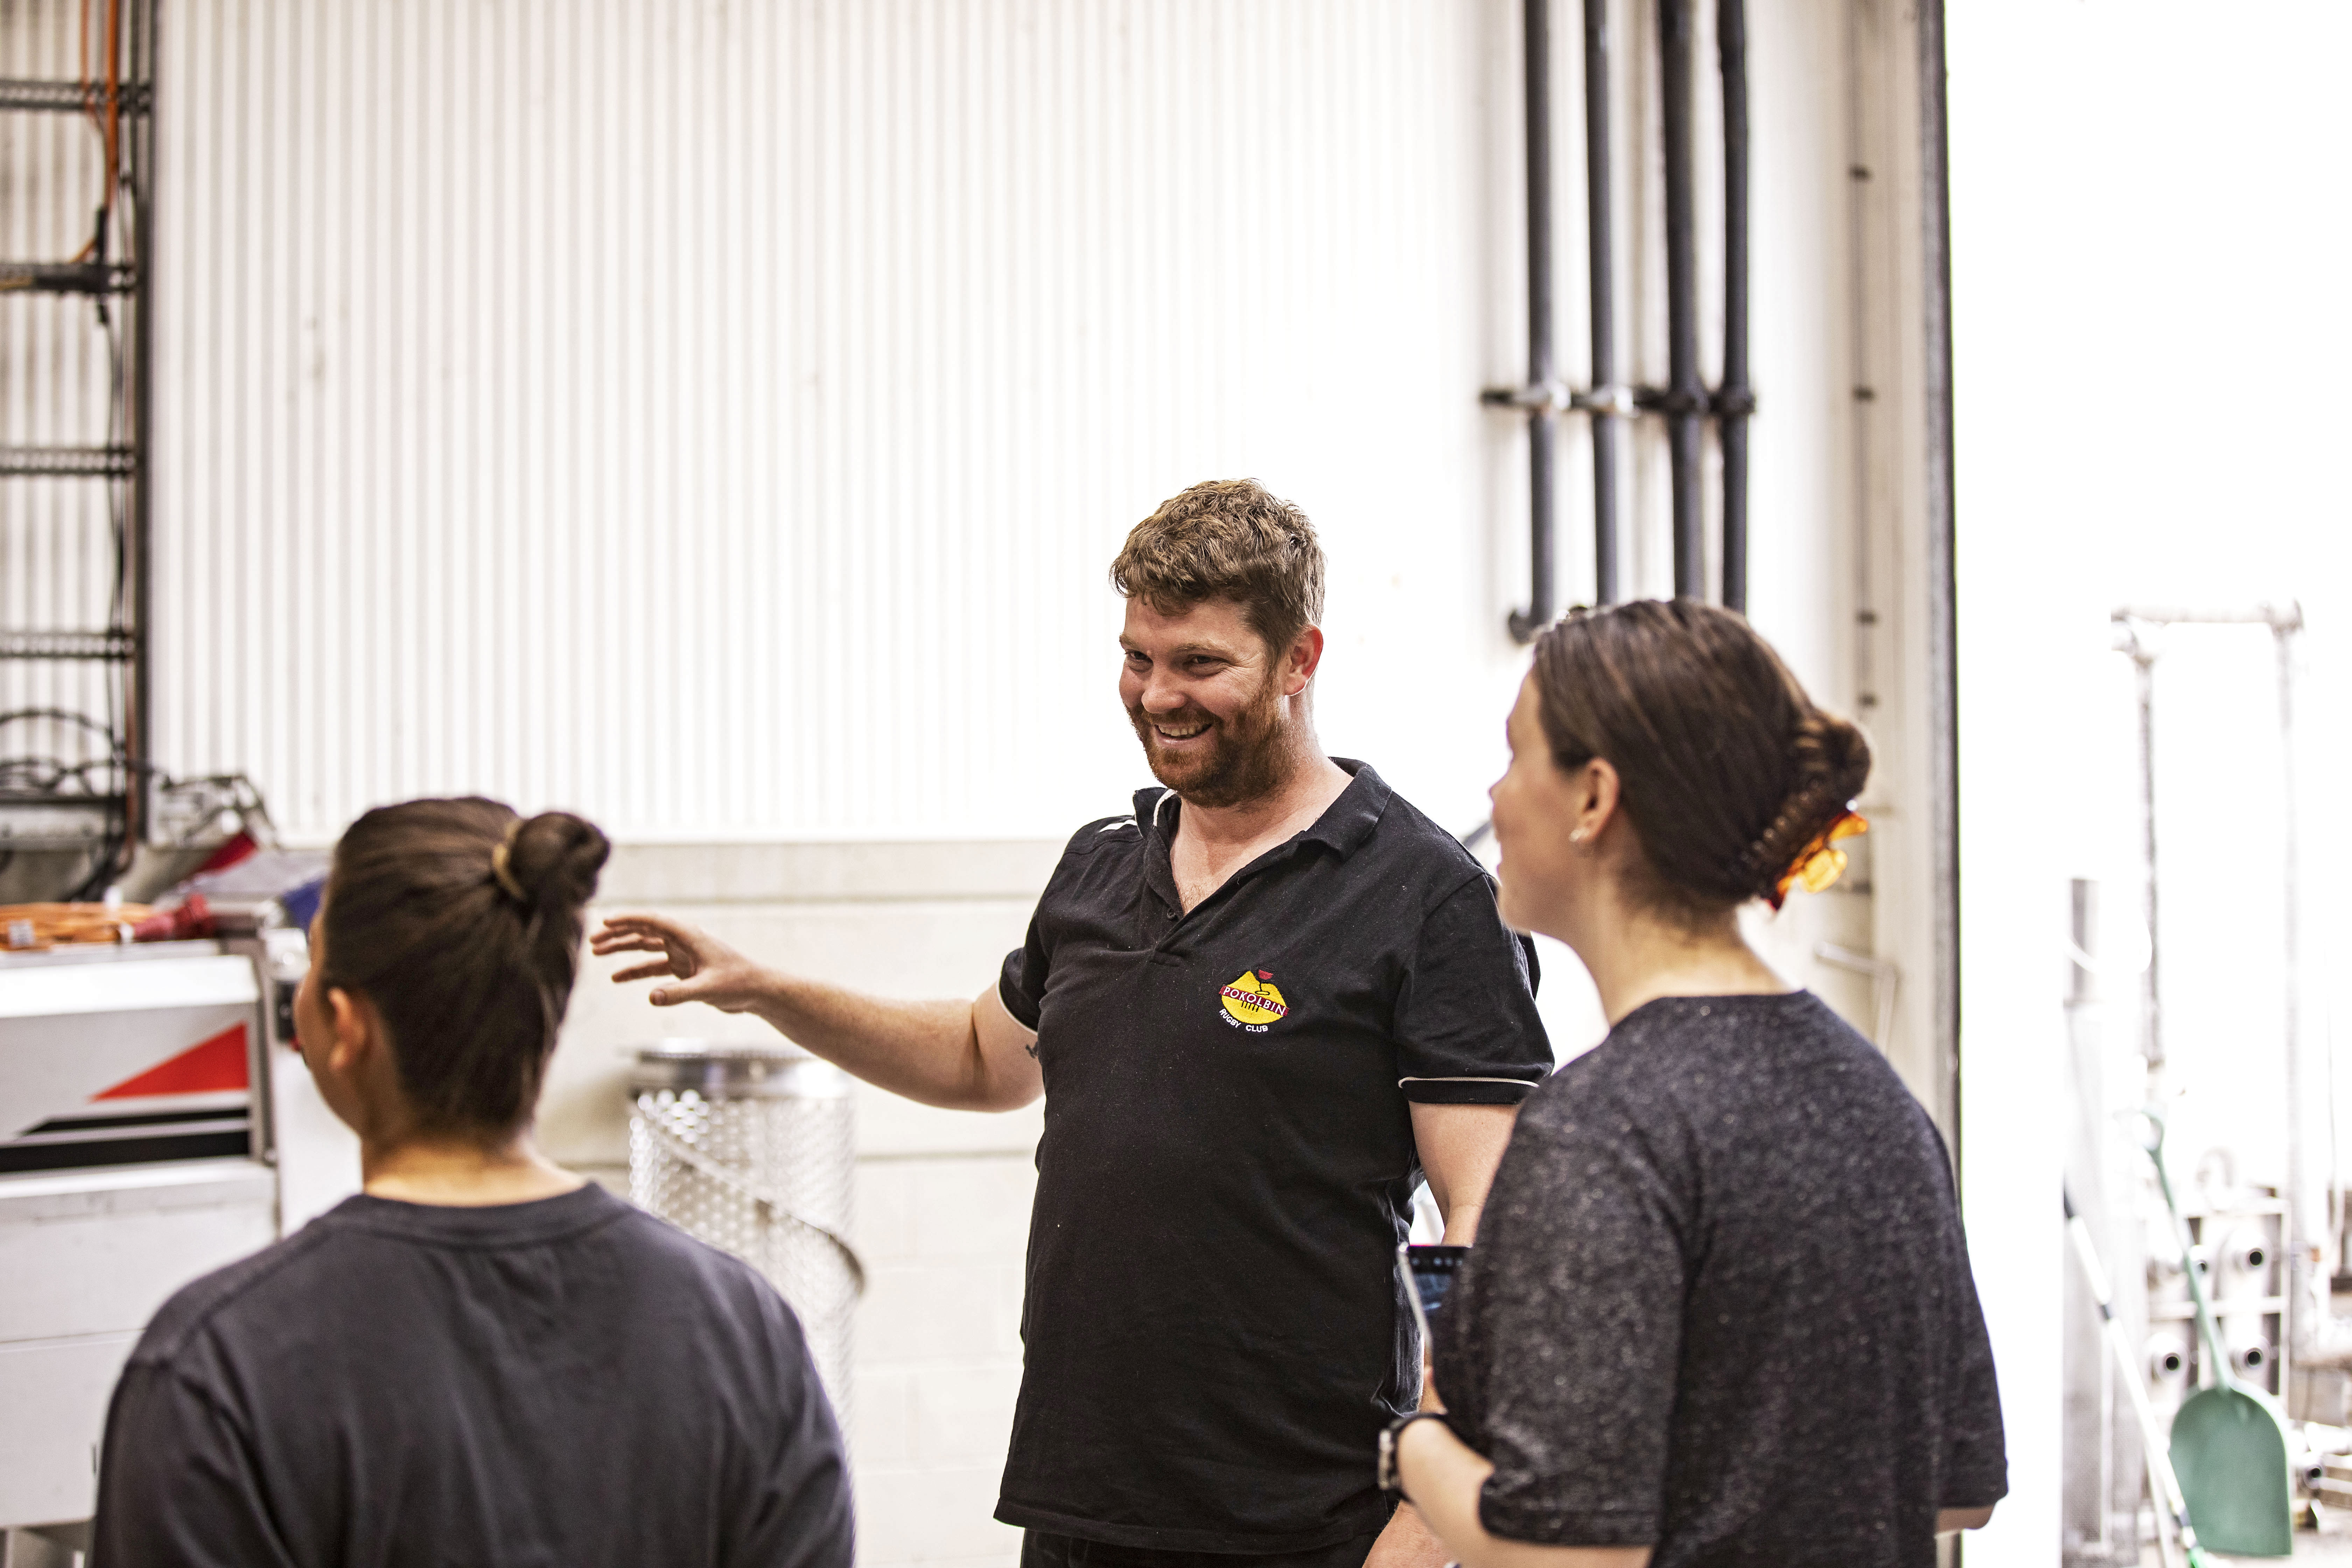 Meet our winemaker, Conor!